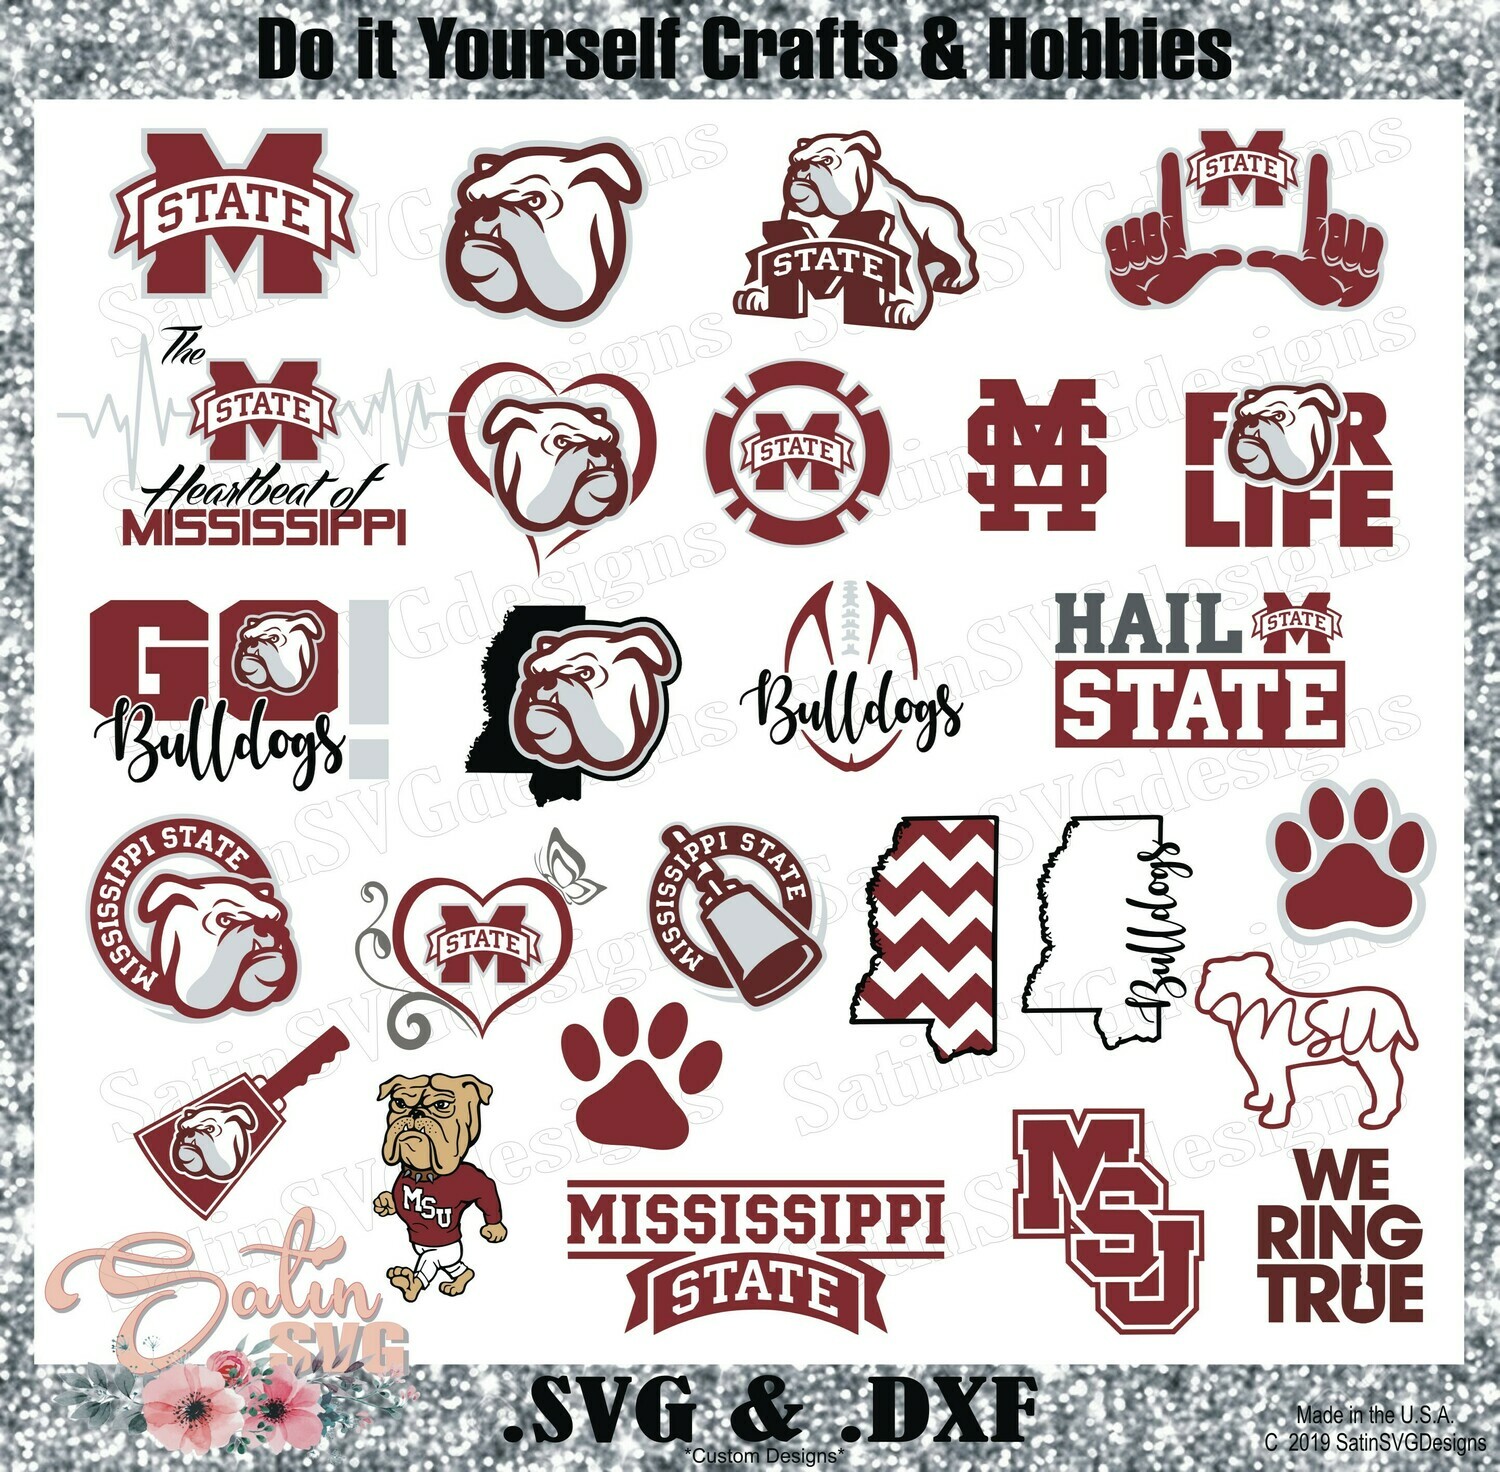 Mississippi State Bulldogs NEW Custom Central Florida University Designs. SVG Files, Cricut, Silhouette Studio, Digital Cut Files, Infusible Ink